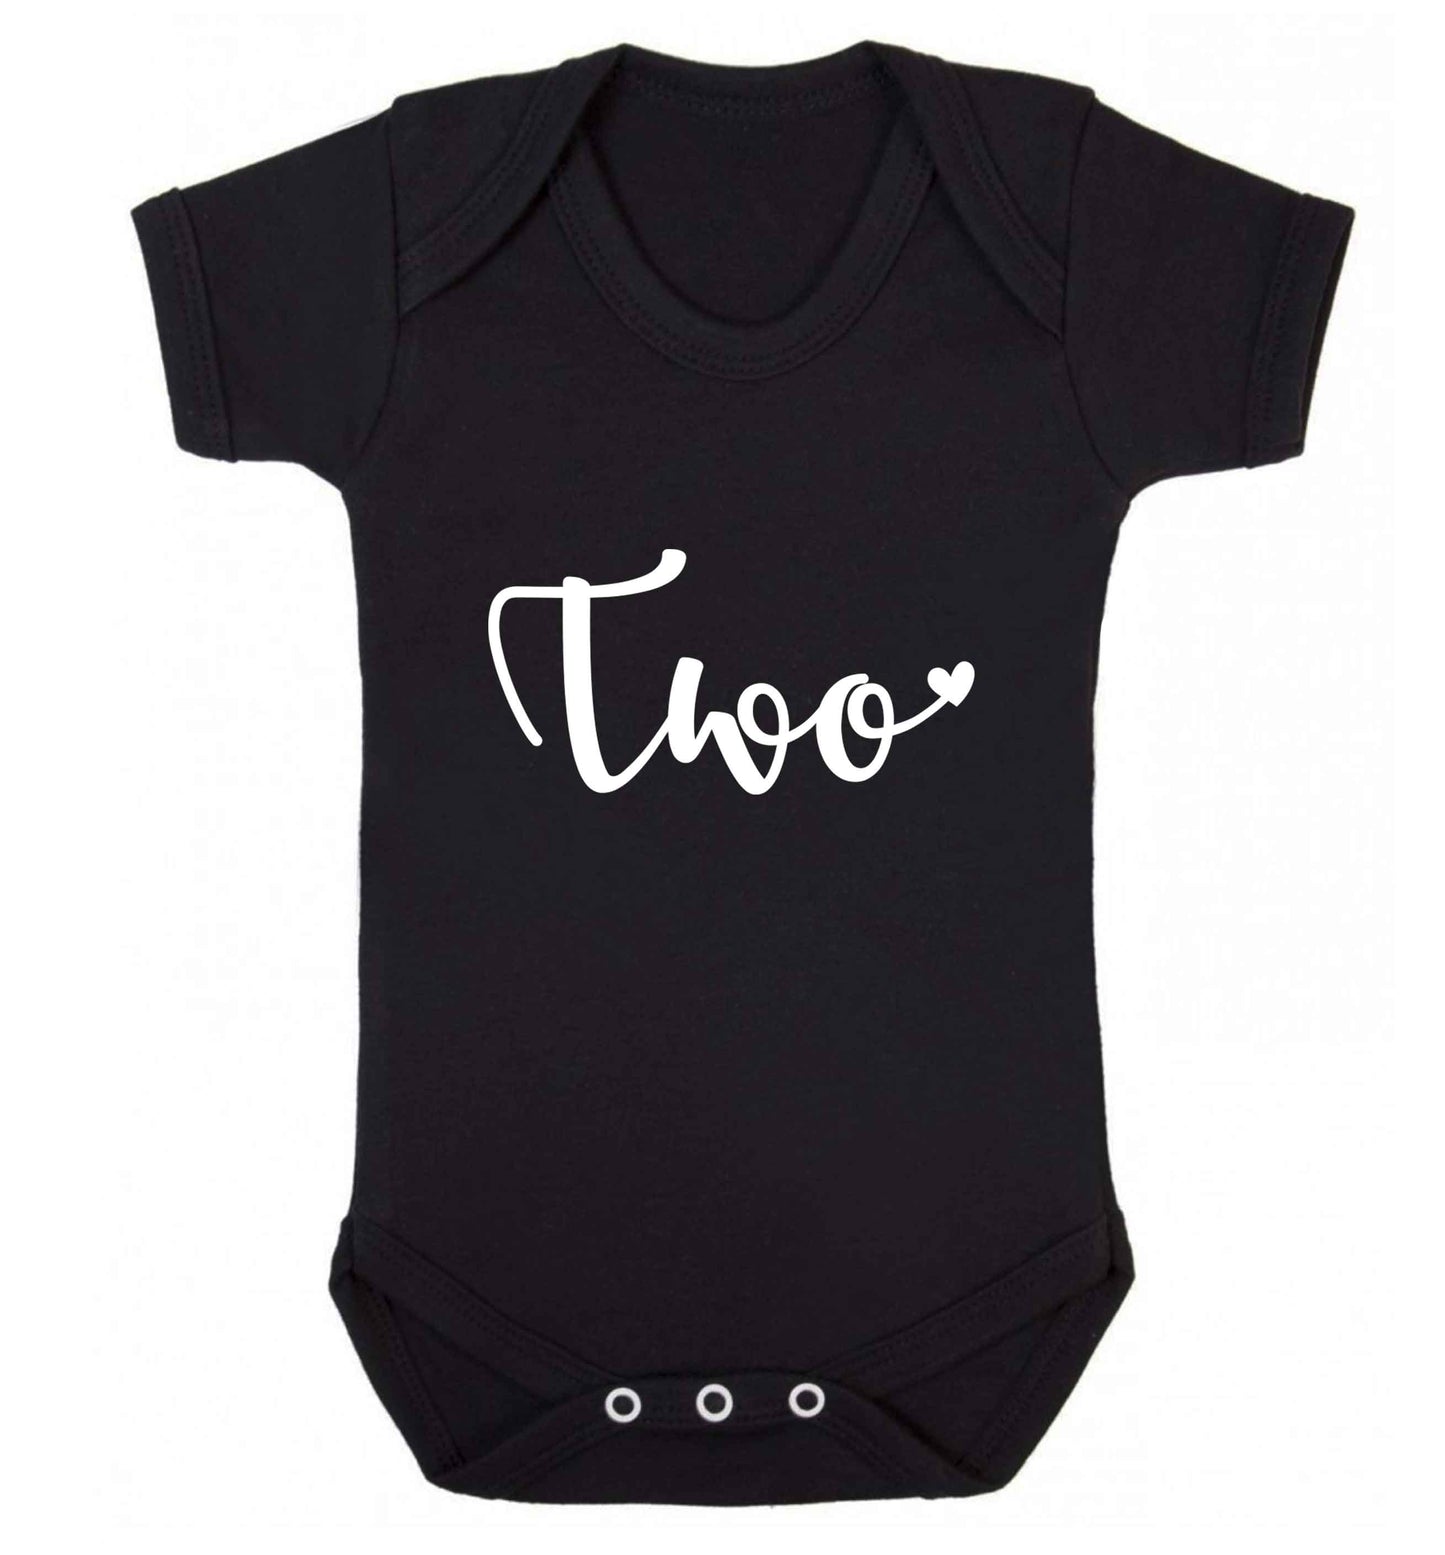 Two and Heart baby vest black 18-24 months